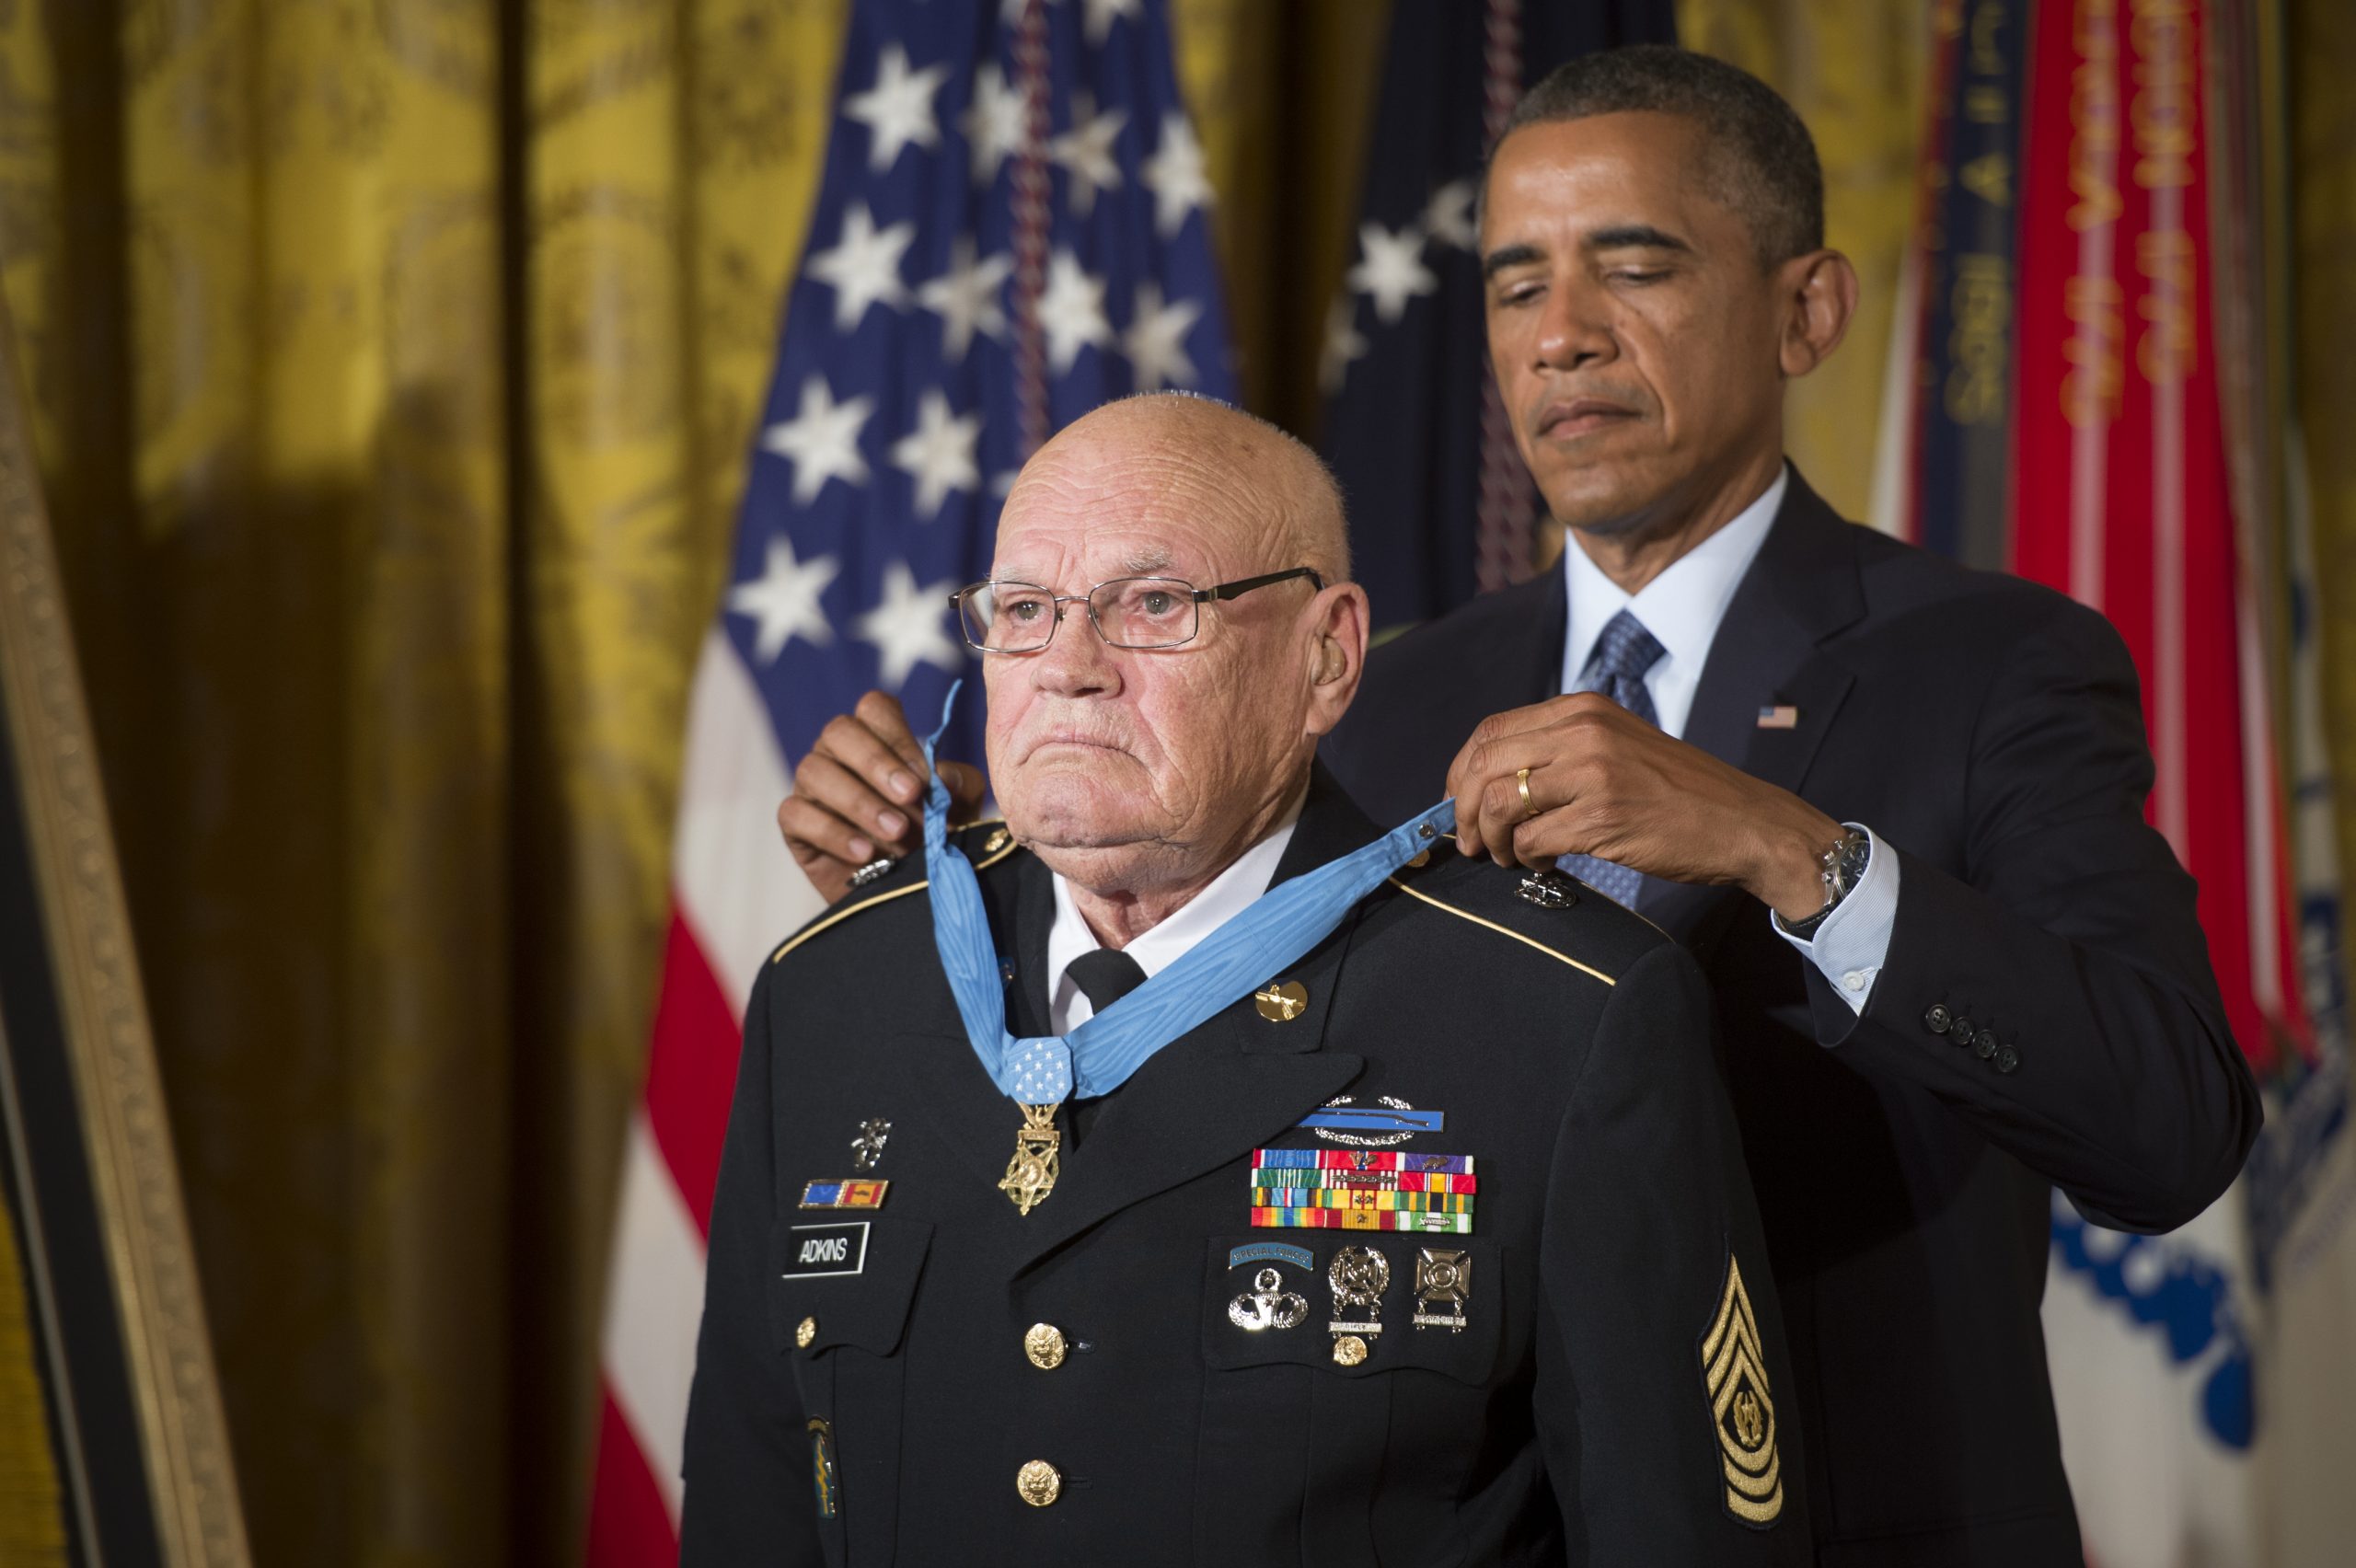 Medal of Honor recipient, Opelika native Bennie Adkins dies after battle with COVID-19